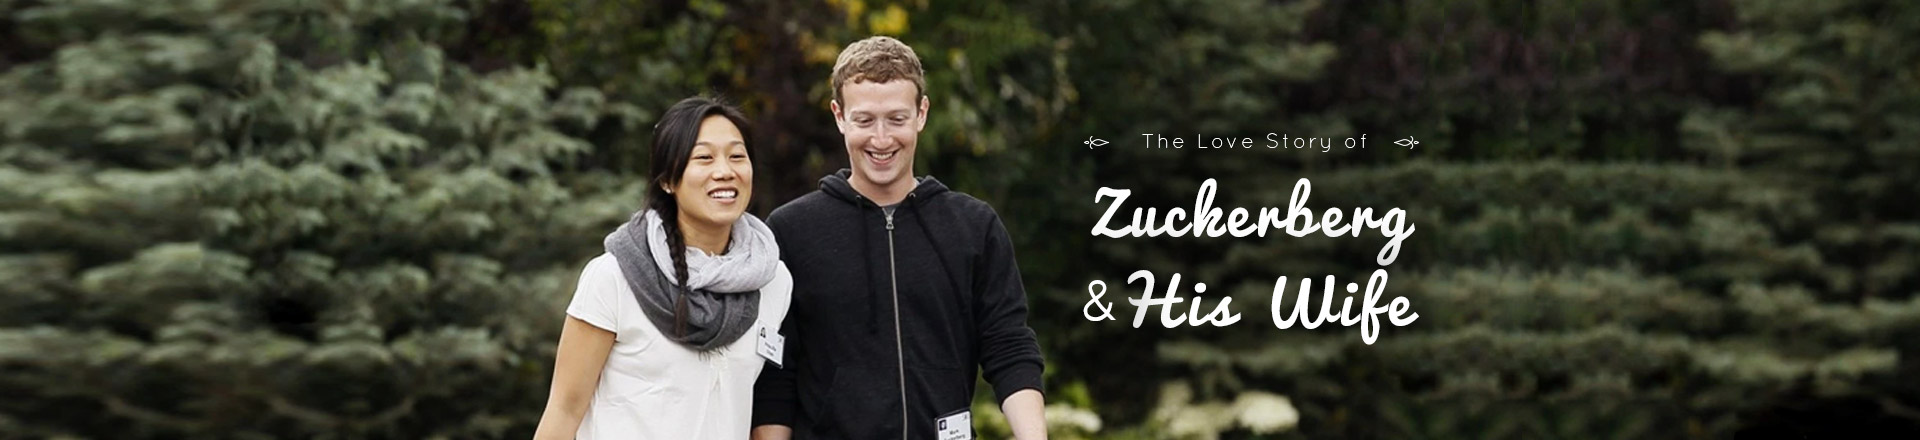 The Love Story of Mark Zuckerberg and His Wife Priscilla Chan